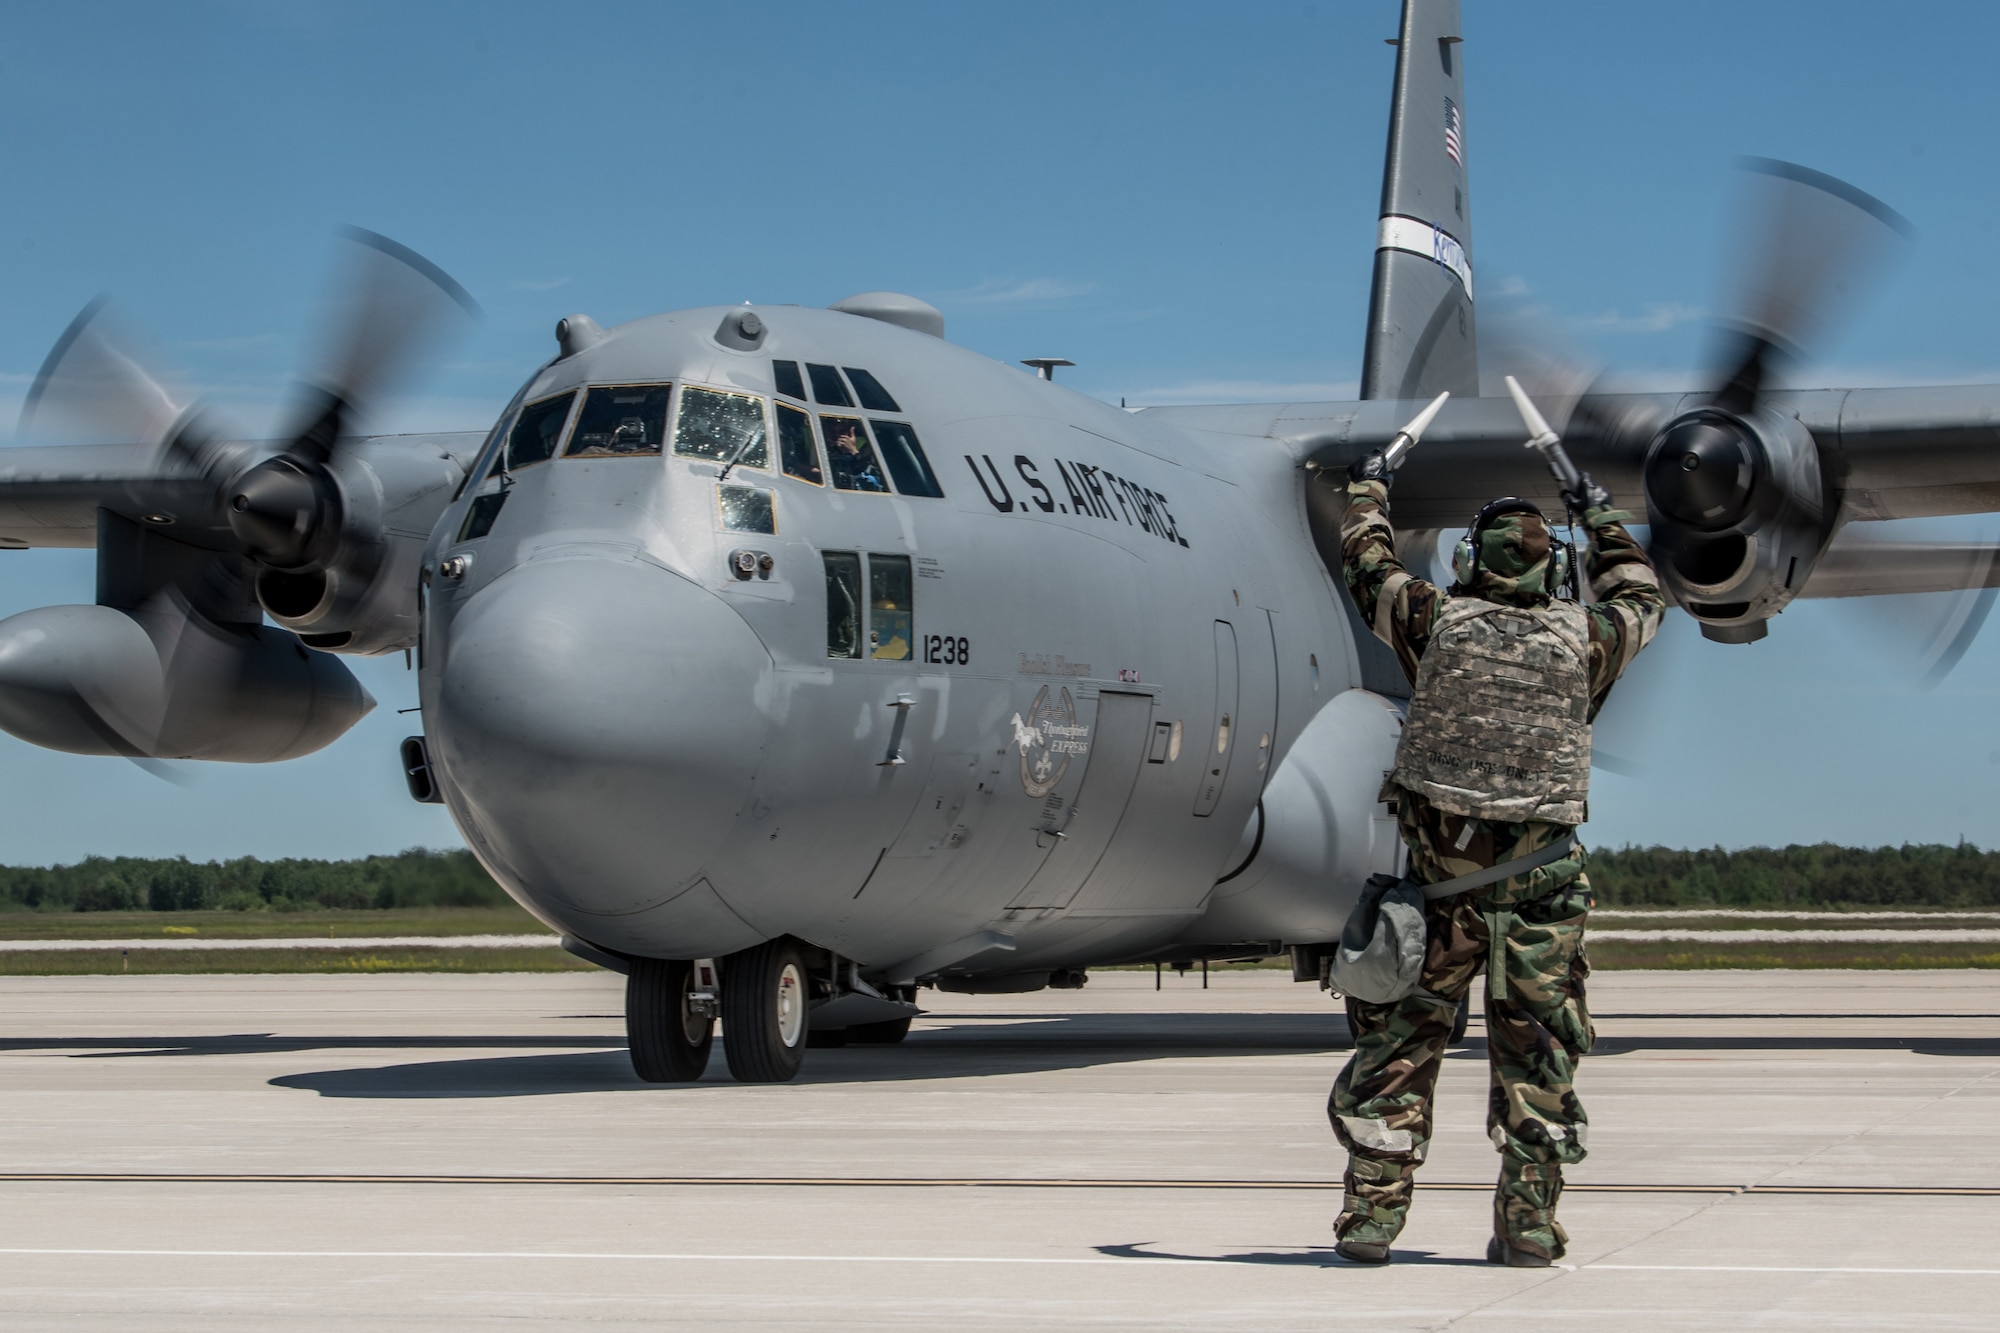 An aircraft maintainer wearing a chemical warfare defense ensemble directs a Kentucky Air National Guard C-130 Hercules aircraft to its parking spot at the Alpena Combat Readiness Training Center in Alpena, Mich., June 23, 2019, during exercise Charred Barrel. The event tested the wing’s ability to mobilize, fly to a remote site, and operate in a hostile environment. (U.S. Air National Guard photo by Staff Sgt. Joshua Horton)